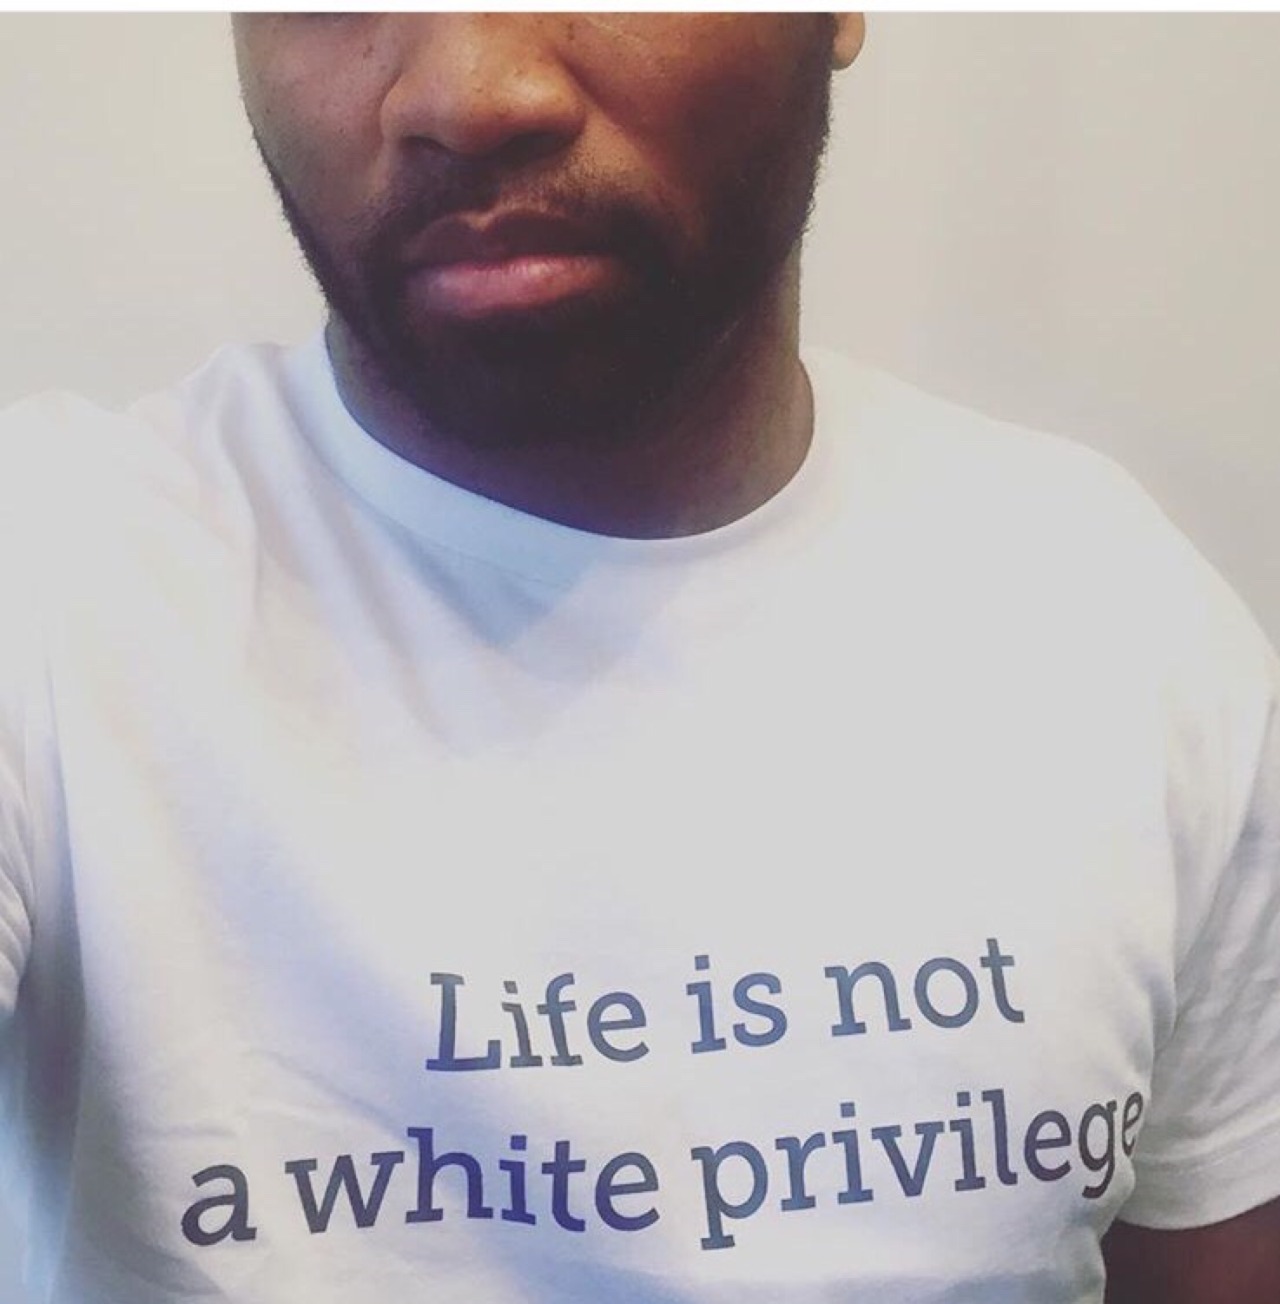 black-culture:  http://teespring.com/life-is-not-a-white-privilege  Life is not a